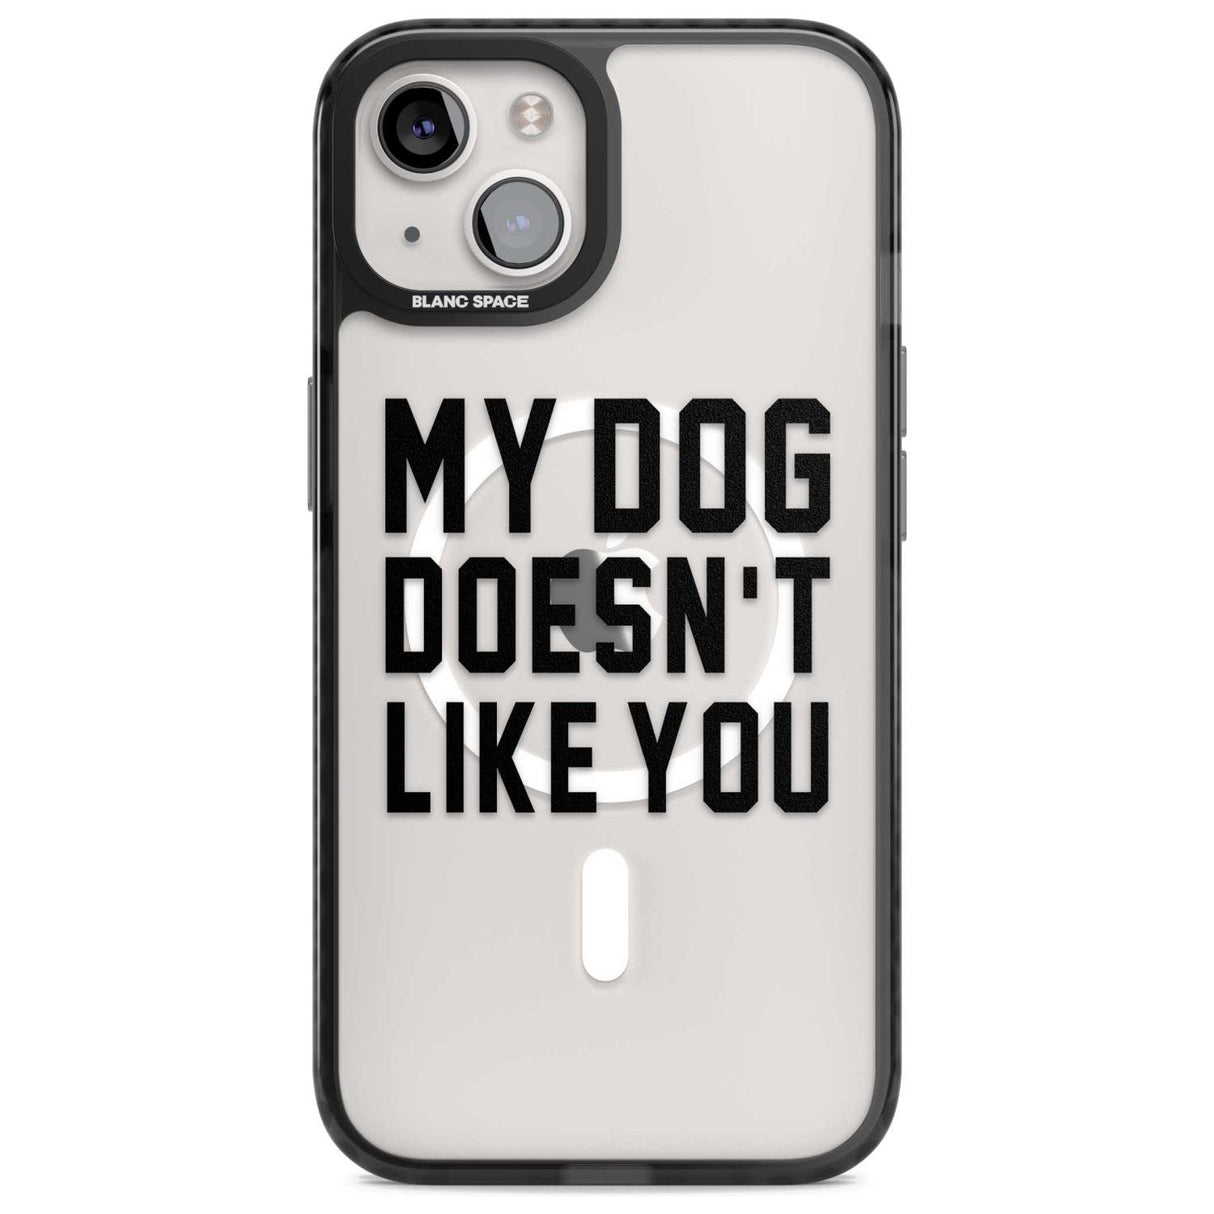 Dog Doesn't Like You Phone Case iPhone 15 Plus / Magsafe Black Impact Case,iPhone 15 / Magsafe Black Impact Case,iPhone 14 Plus / Magsafe Black Impact Case,iPhone 14 / Magsafe Black Impact Case,iPhone 13 / Magsafe Black Impact Case Blanc Space